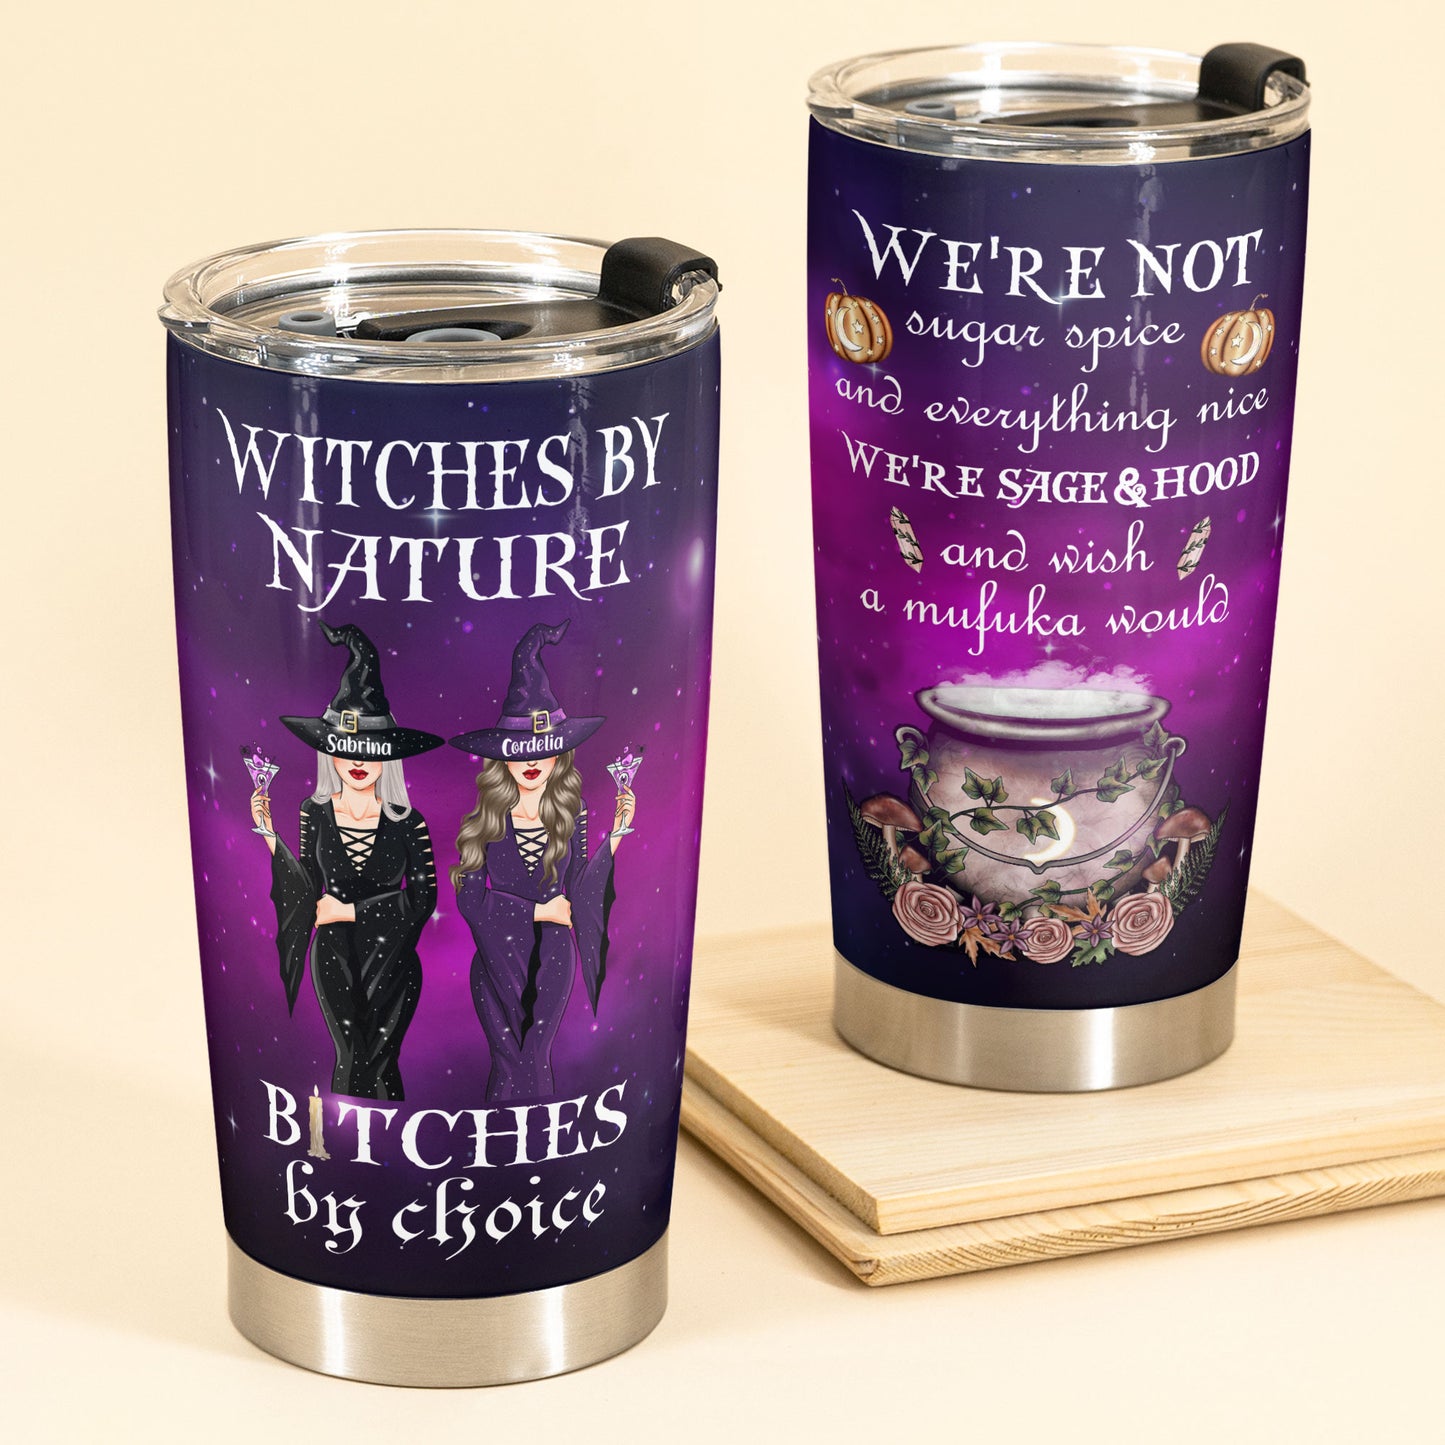 Witches By Nature Bitches By Choice - Personalized Tumbler Cup - Halloween Gift For Witches